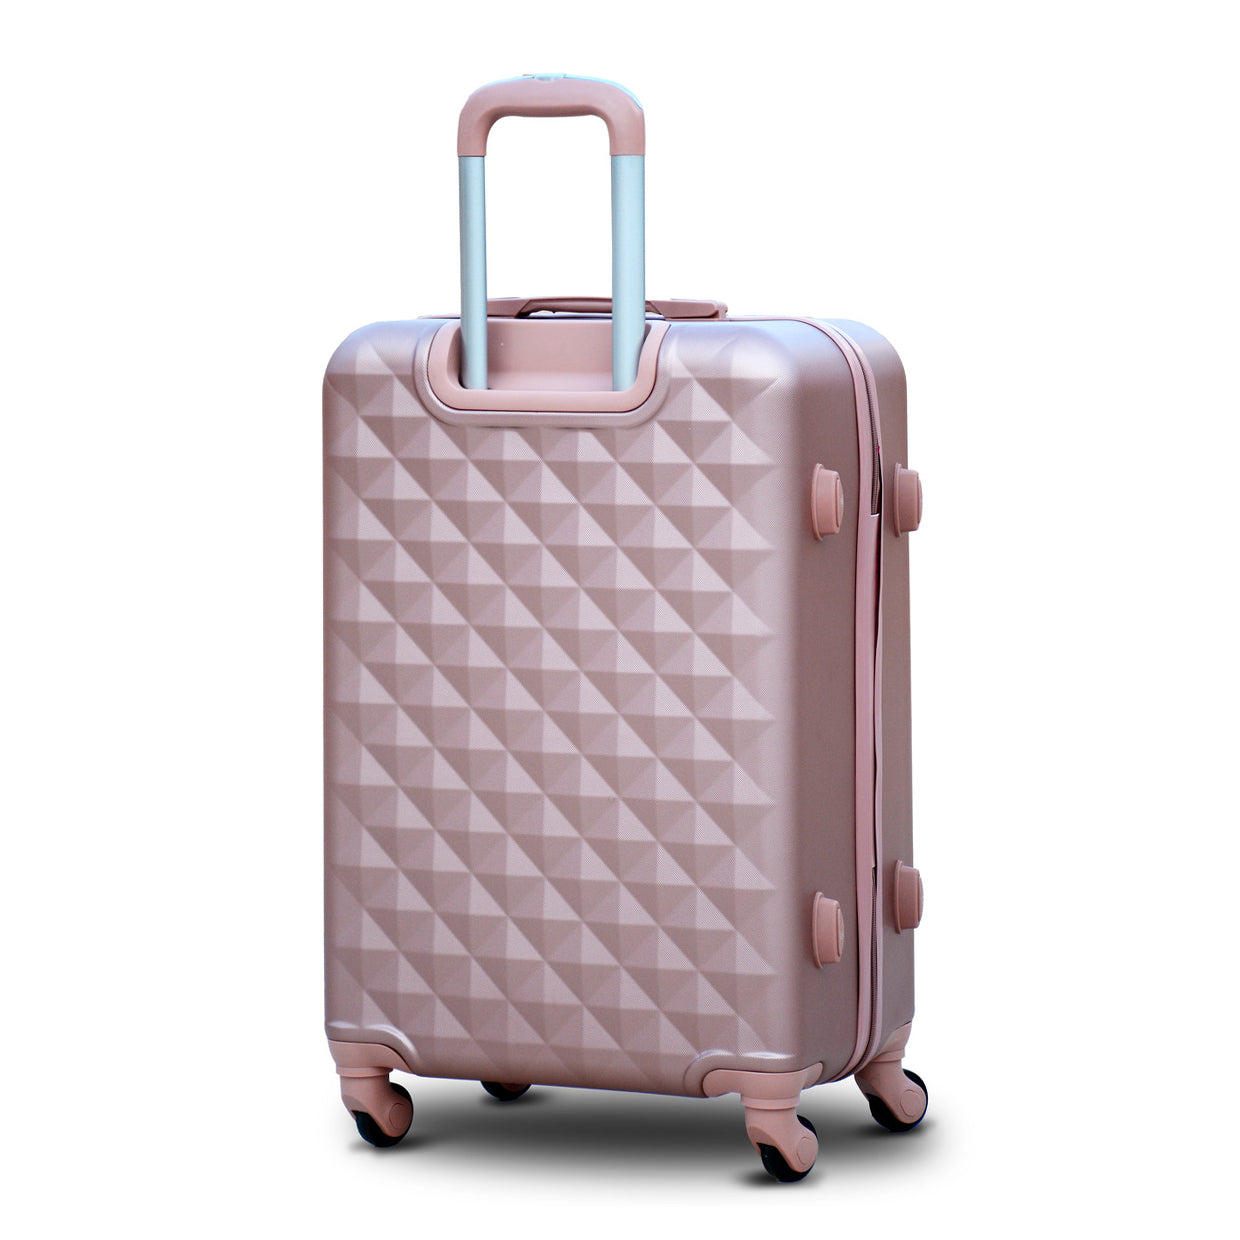 4 Piece Full Set 7" 20" 24" 28 Inches Rose Gold Diamond Cut ABS Lightweight Luggage Hard Case Spinner Wheel Trolley Bag